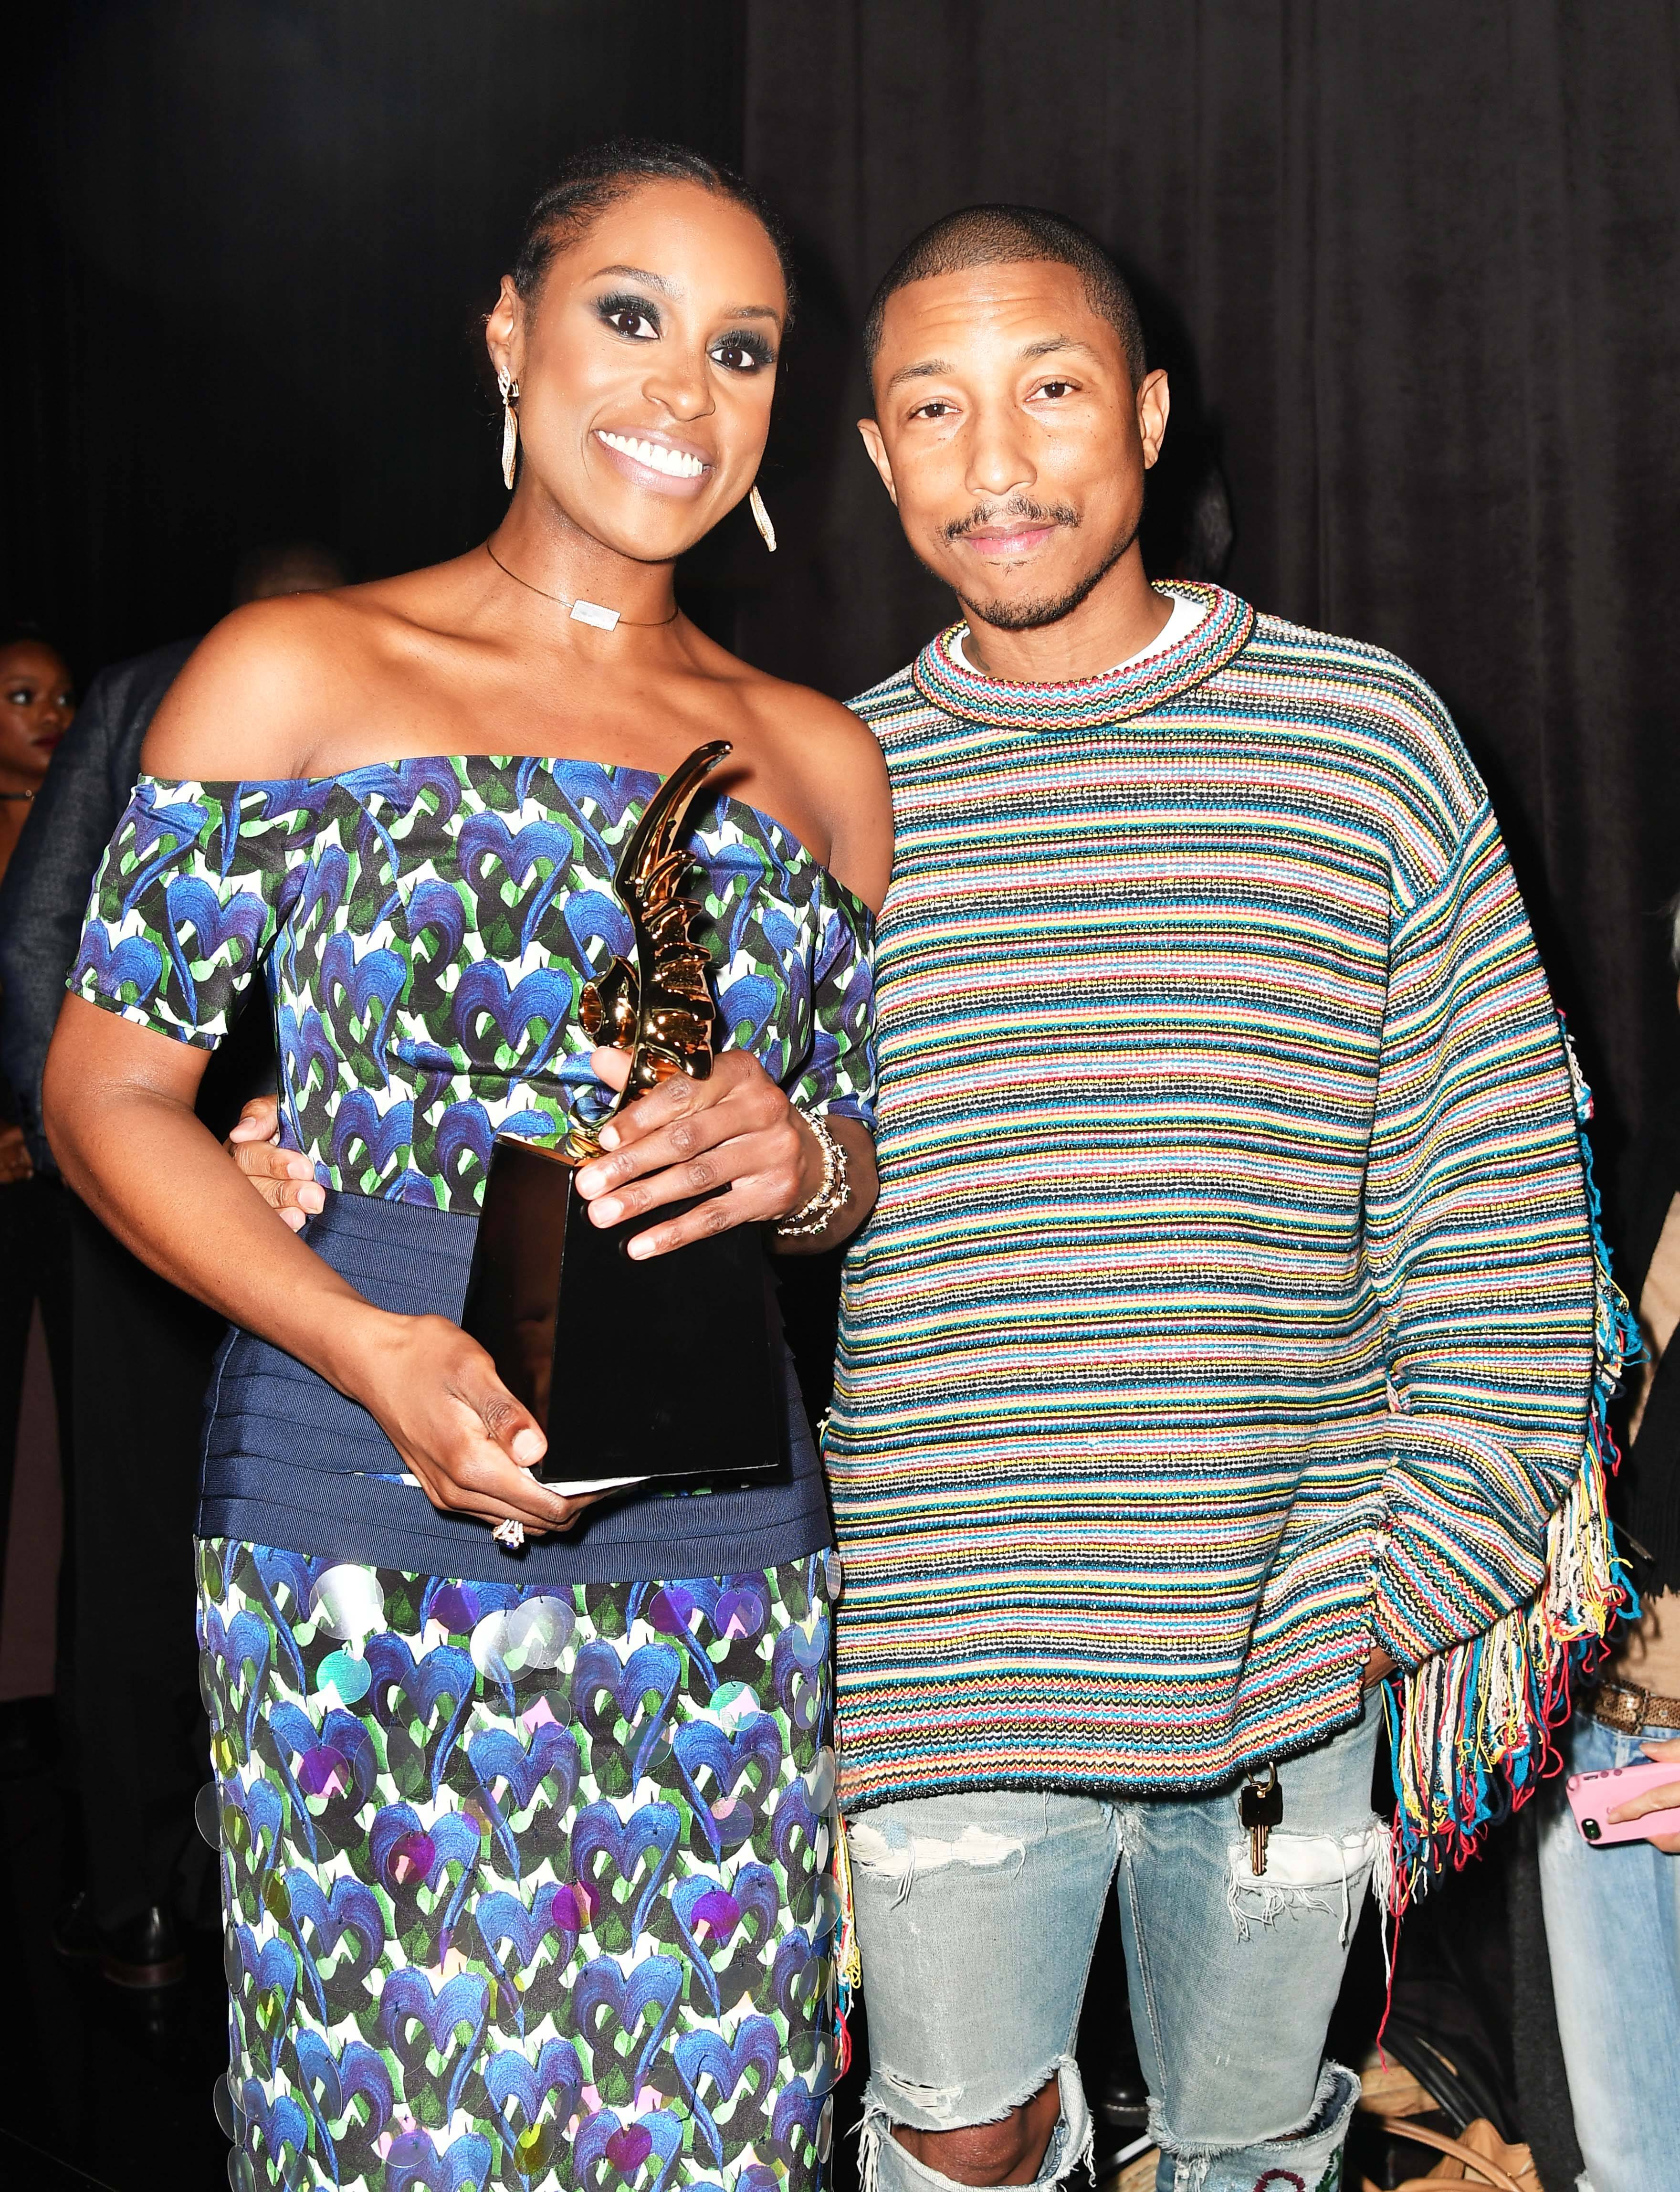 Not So Awkward Acceptance - Rising Star honoree Issa Rae and producer/music artist Pharrell Williams pose together after she accepts her win. (Photo: Earl Gibson III/Getty Images for BET)&nbsp;